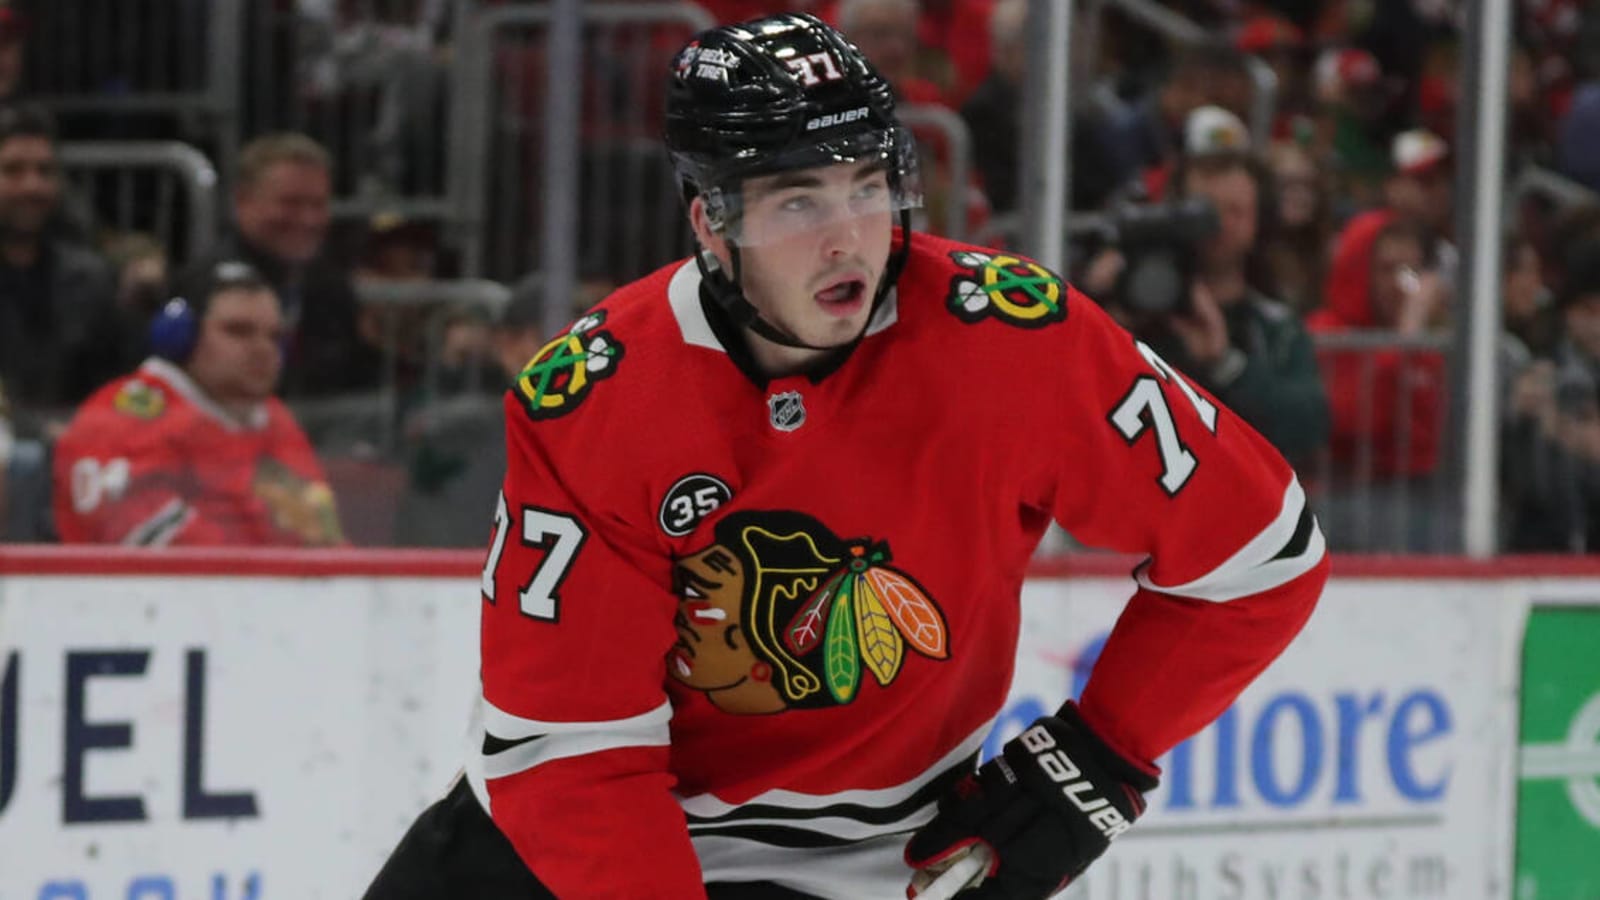 Down and Out: The future of the Chicago Blackhawks